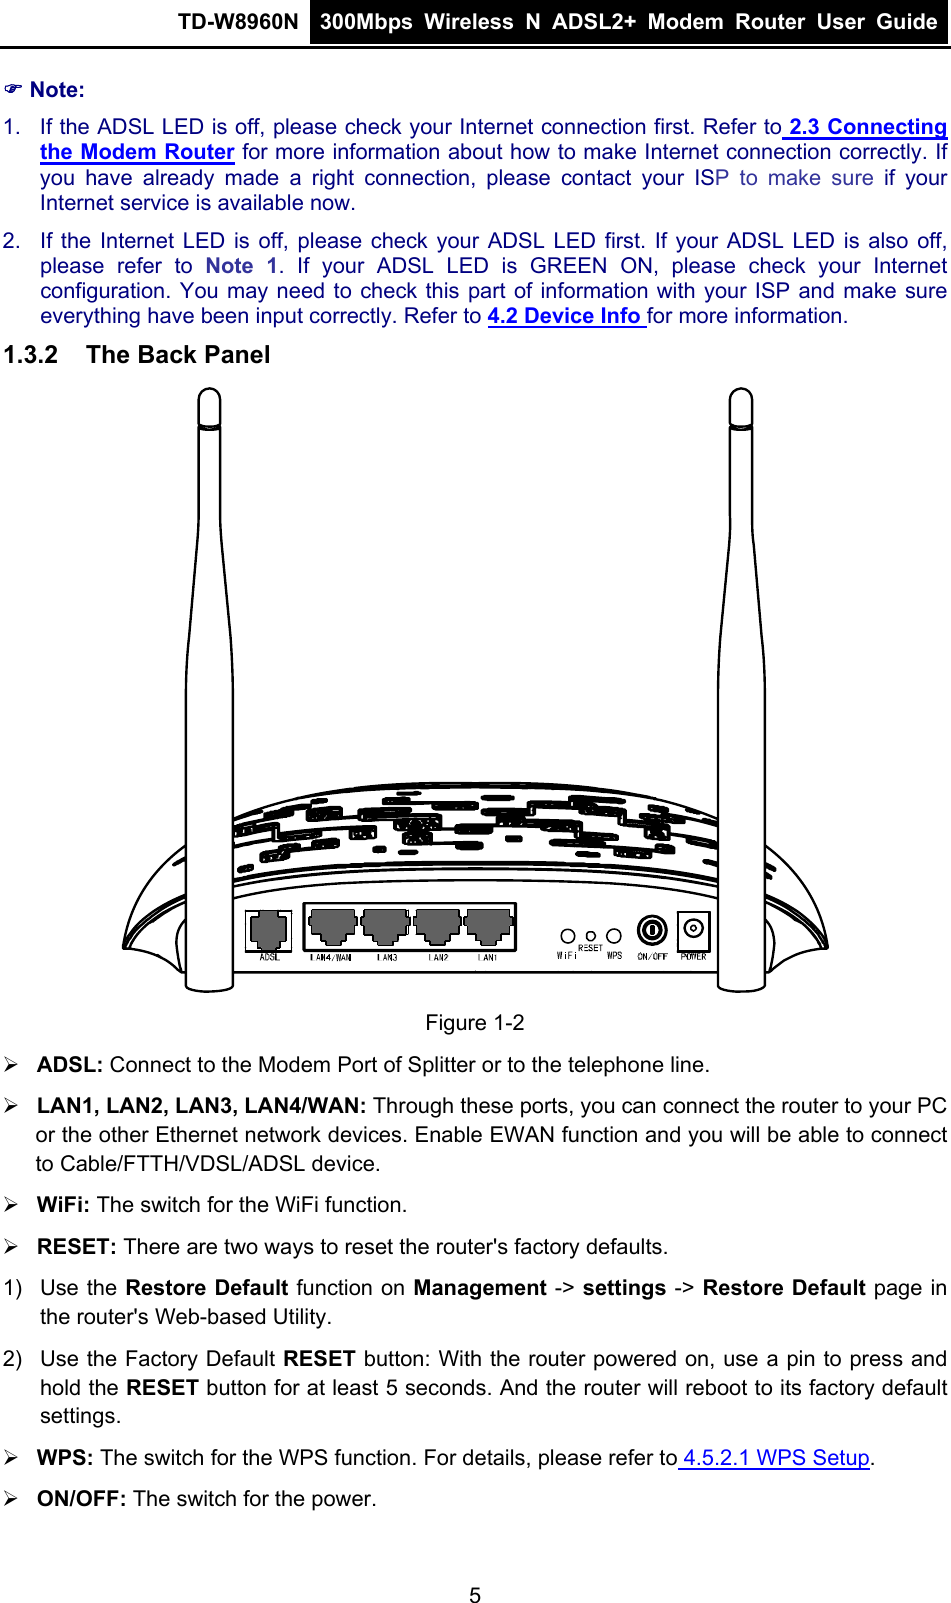 TD-W8960N  300Mbps Wireless N ADSL2+ Modem Router User Guide   Note: 1.  If the ADSL LED is off, please check your Internet connection first. Refer to 2.3 Connecting the Modem Router for more information about how to make Internet connection correctly. If you have already made a right connection, please contact your ISP to make sure if your Internet service is available now. 2.  If the Internet LED is off, please check your ADSL LED first. If your ADSL LED is also off, please refer to Note 1. If your ADSL LED is GREEN ON, please check your Internet configuration. You may need to check this part of information with your ISP and make sure everything have been input correctly. Refer to 4.2 Device Info for more information. 1.3.2  The Back Panel   Figure 1-2  ADSL: Connect to the Modem Port of Splitter or to the telephone line.  LAN1, LAN2, LAN3, LAN4/WAN: Through these ports, you can connect the router to your PC or the other Ethernet network devices. Enable EWAN function and you will be able to connect to Cable/FTTH/VDSL/ADSL device.  WiFi: The switch for the WiFi function.  RESET: There are two ways to reset the router&apos;s factory defaults. 1) Use the Restore Default function on Management -&gt; settings -&gt; Restore Default page in the router&apos;s Web-based Utility. 2)  Use the Factory Default RESET button: With the router powered on, use a pin to press and hold the RESET button for at least 5 seconds. And the router will reboot to its factory default settings.  WPS: The switch for the WPS function. For details, please refer to 4.5.2.1 WPS Setup.  ON/OFF: The switch for the power. 5 